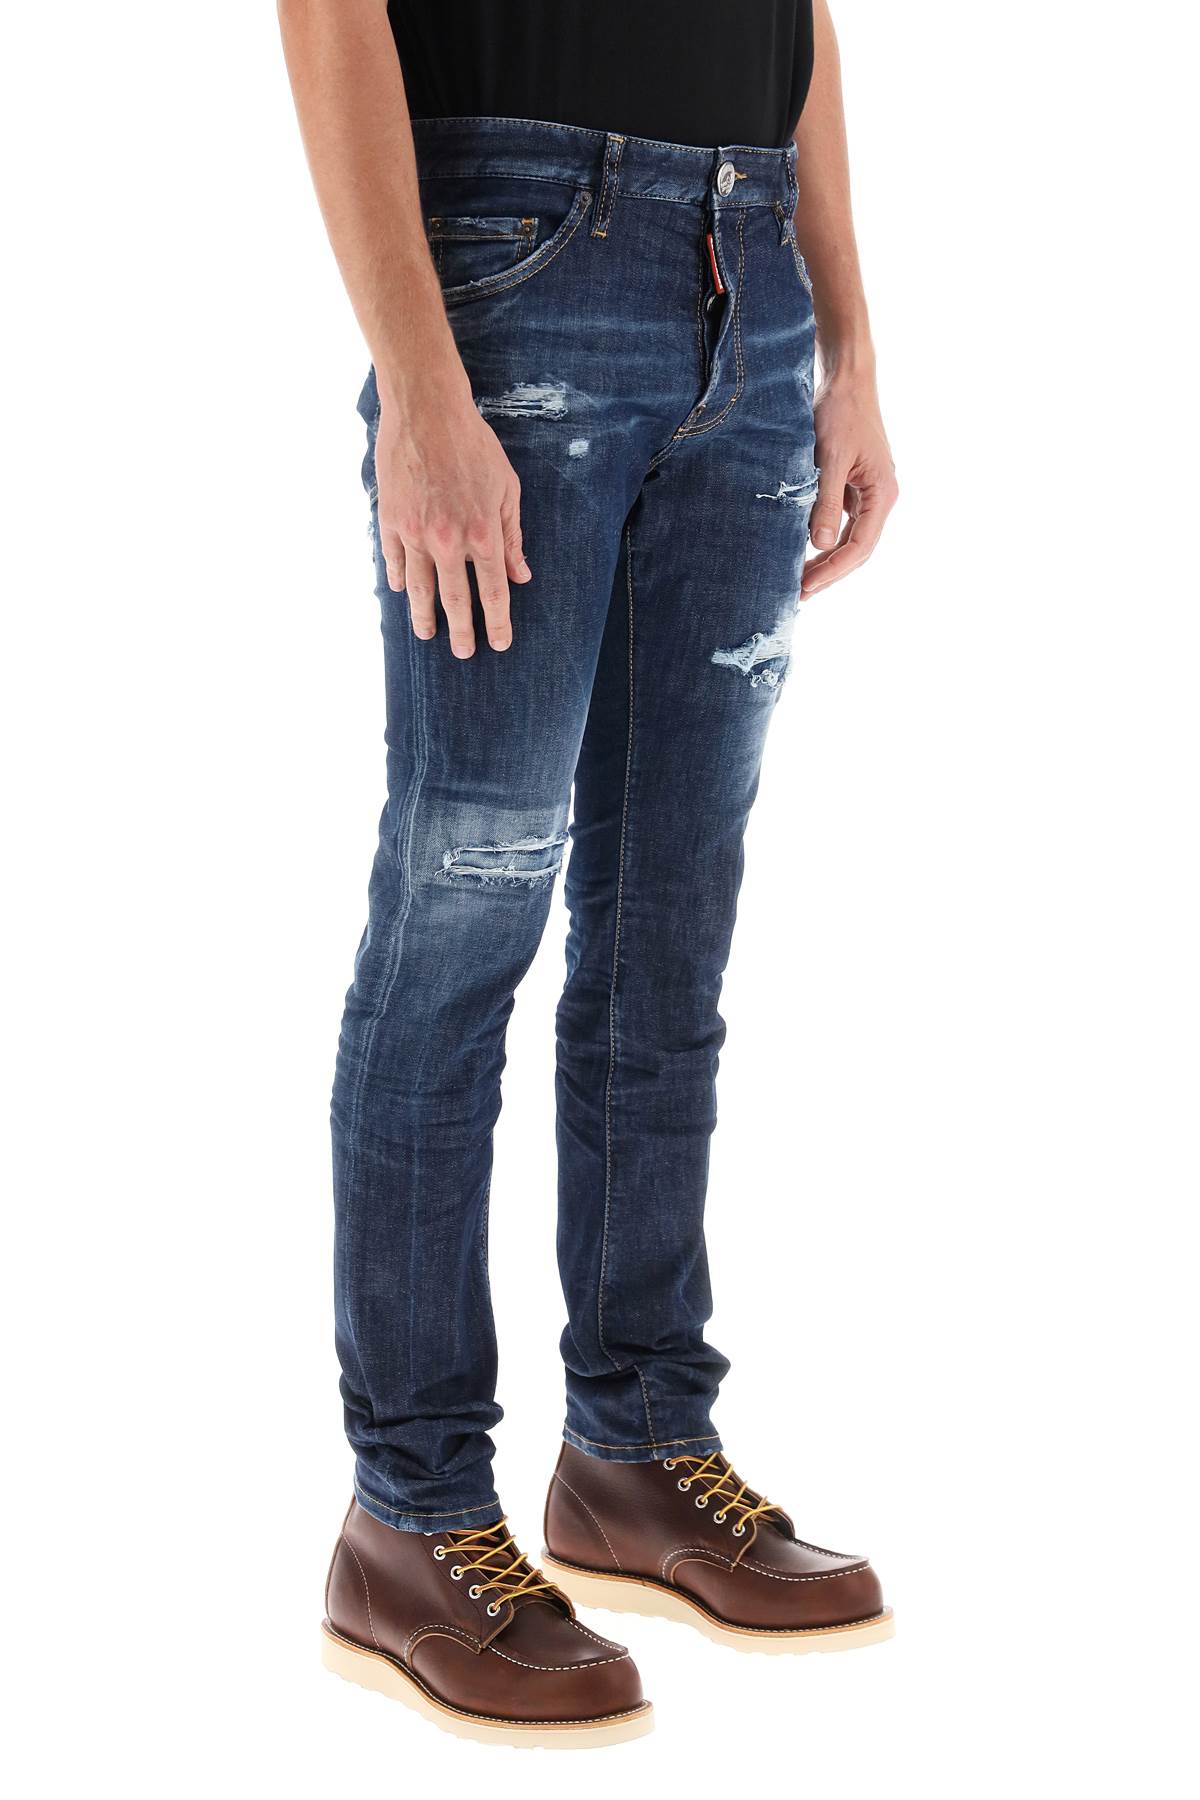 Dsquared2 Dsquared2 dark ripped wash cool guy jeans